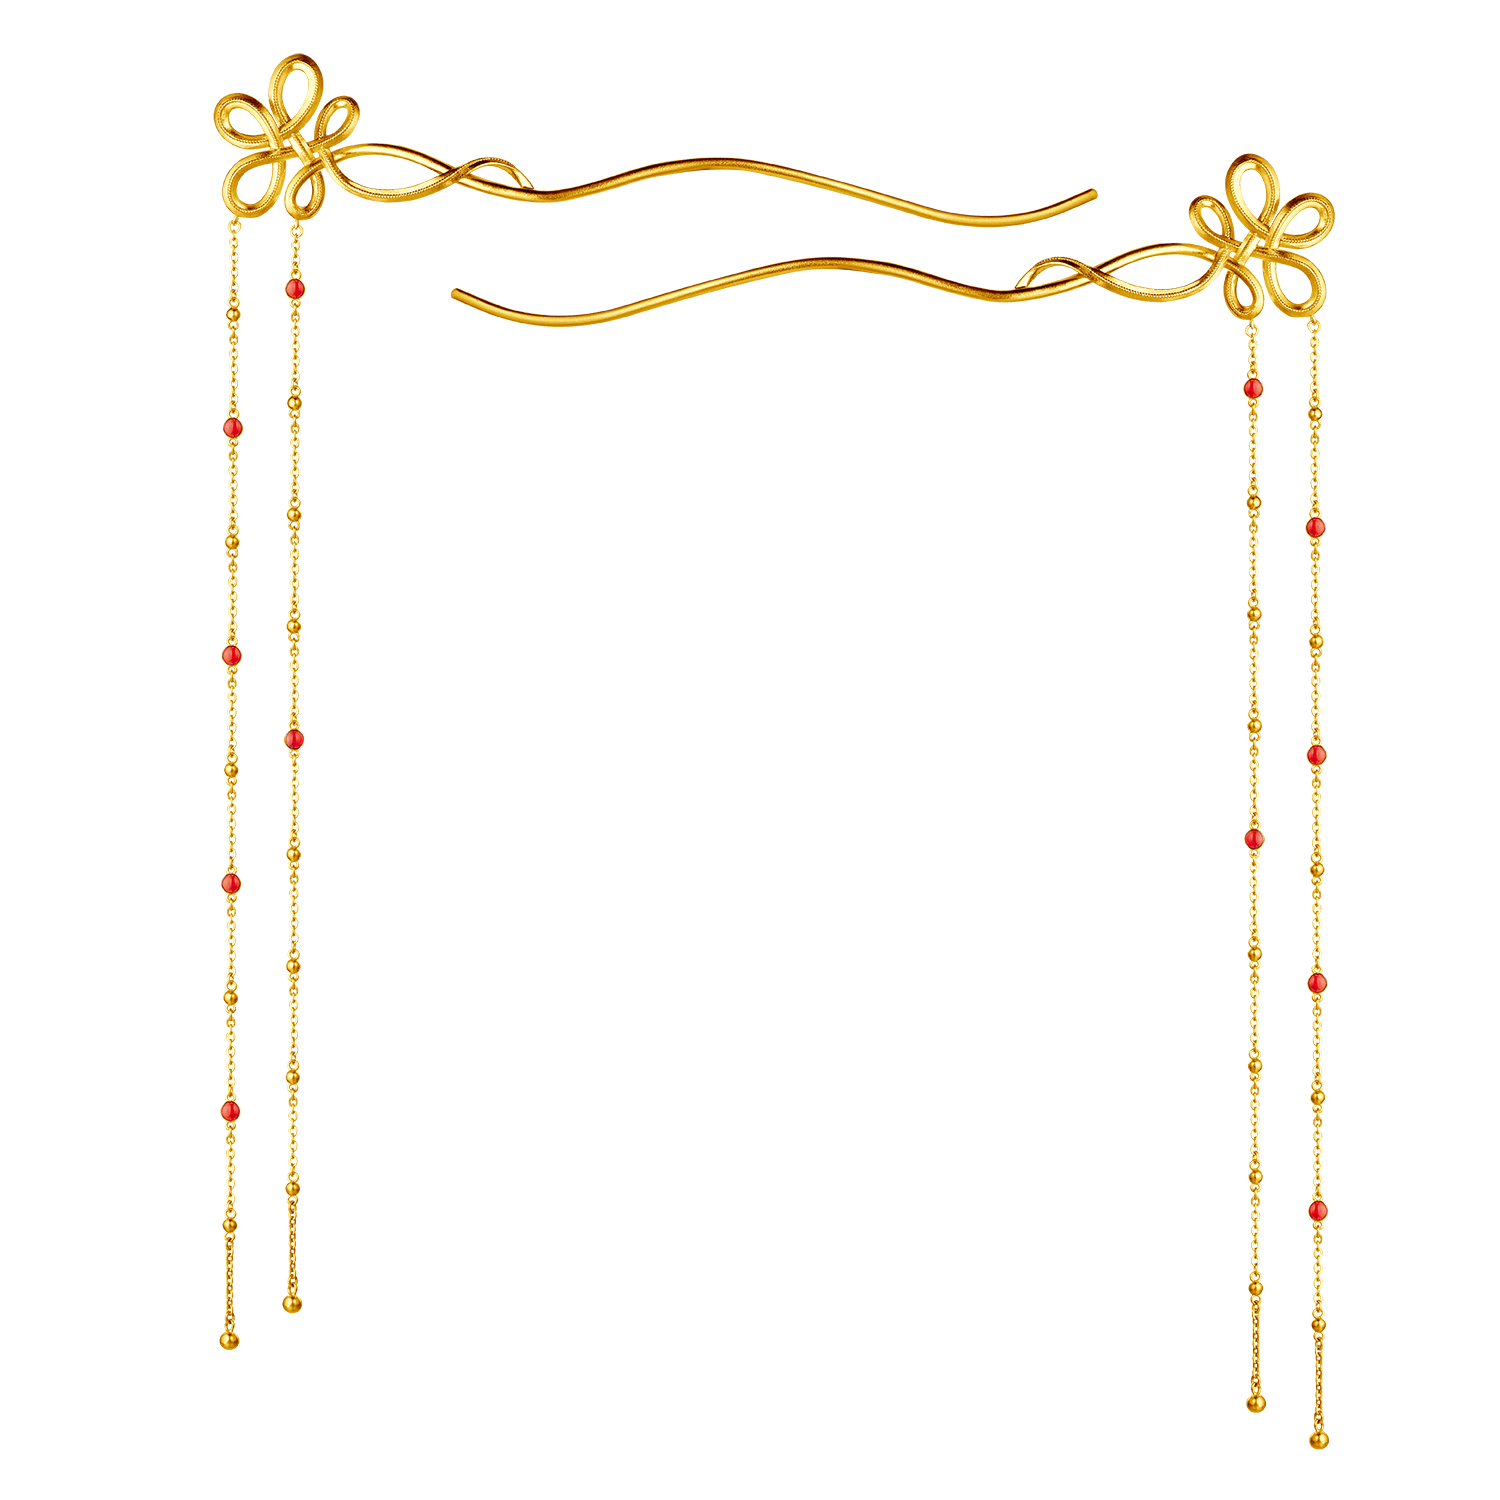 Heirloom Fortune Collection "Tie the Knot " Gold Hairpin 